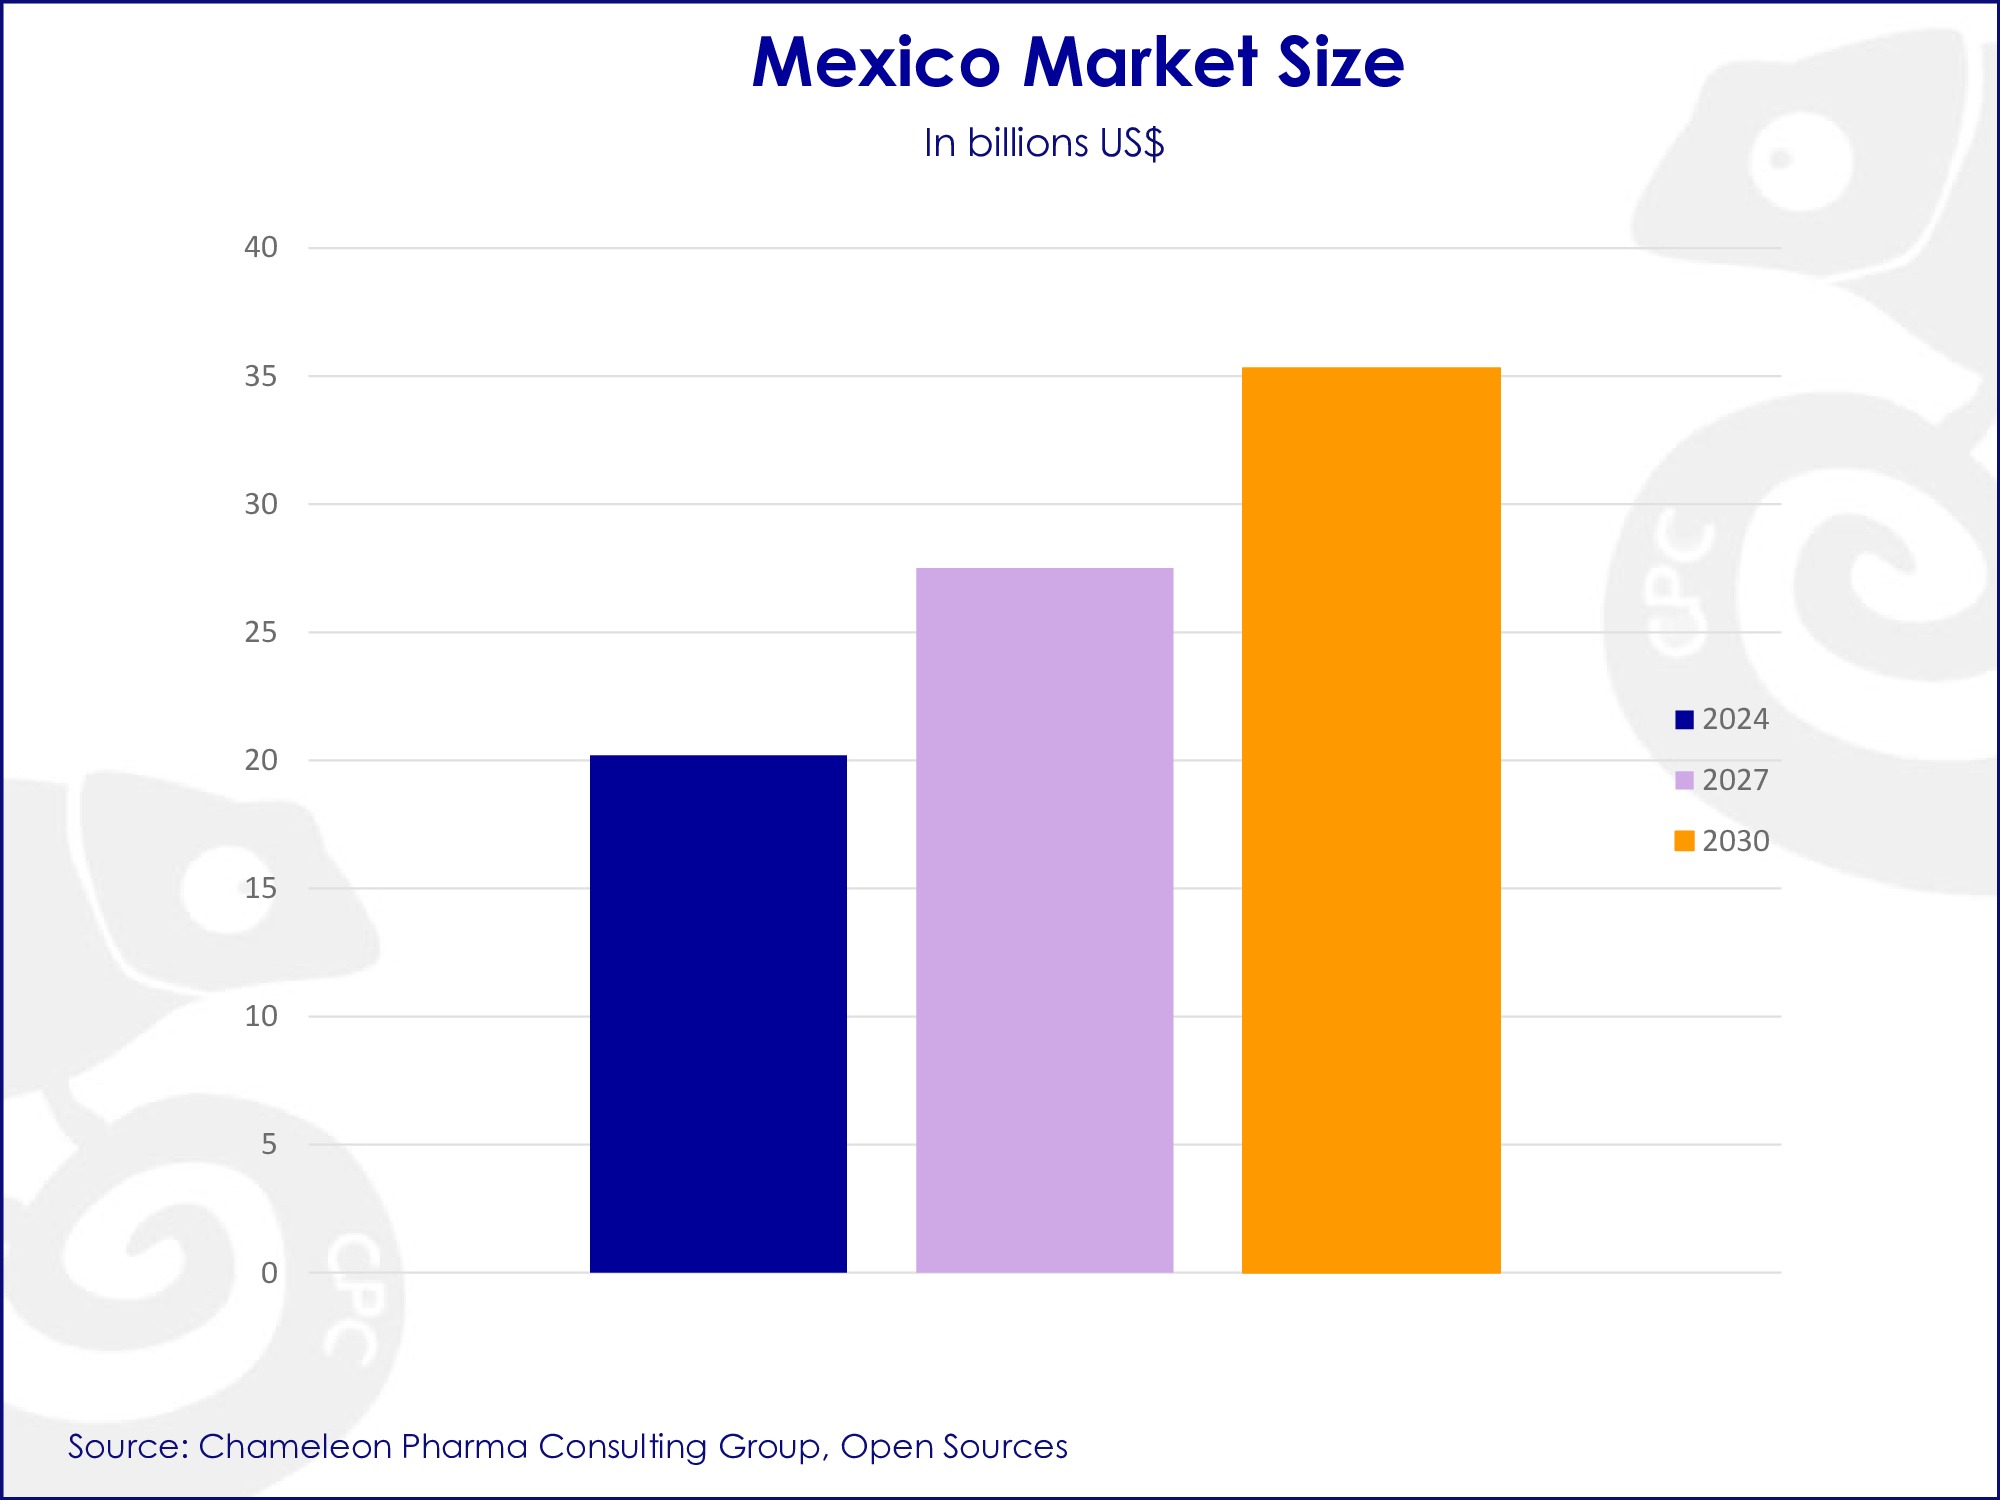 Mexico market growth by 2030, Mexico market size, Registration of OTC, FS, Rx., Cosmetic and Medical Device products in Mexico, requirements for Consumer Health & Pharma registration in Mexico, costs and time, Fast Track process, bioequivalence review process, fast registration, generics and new molecules